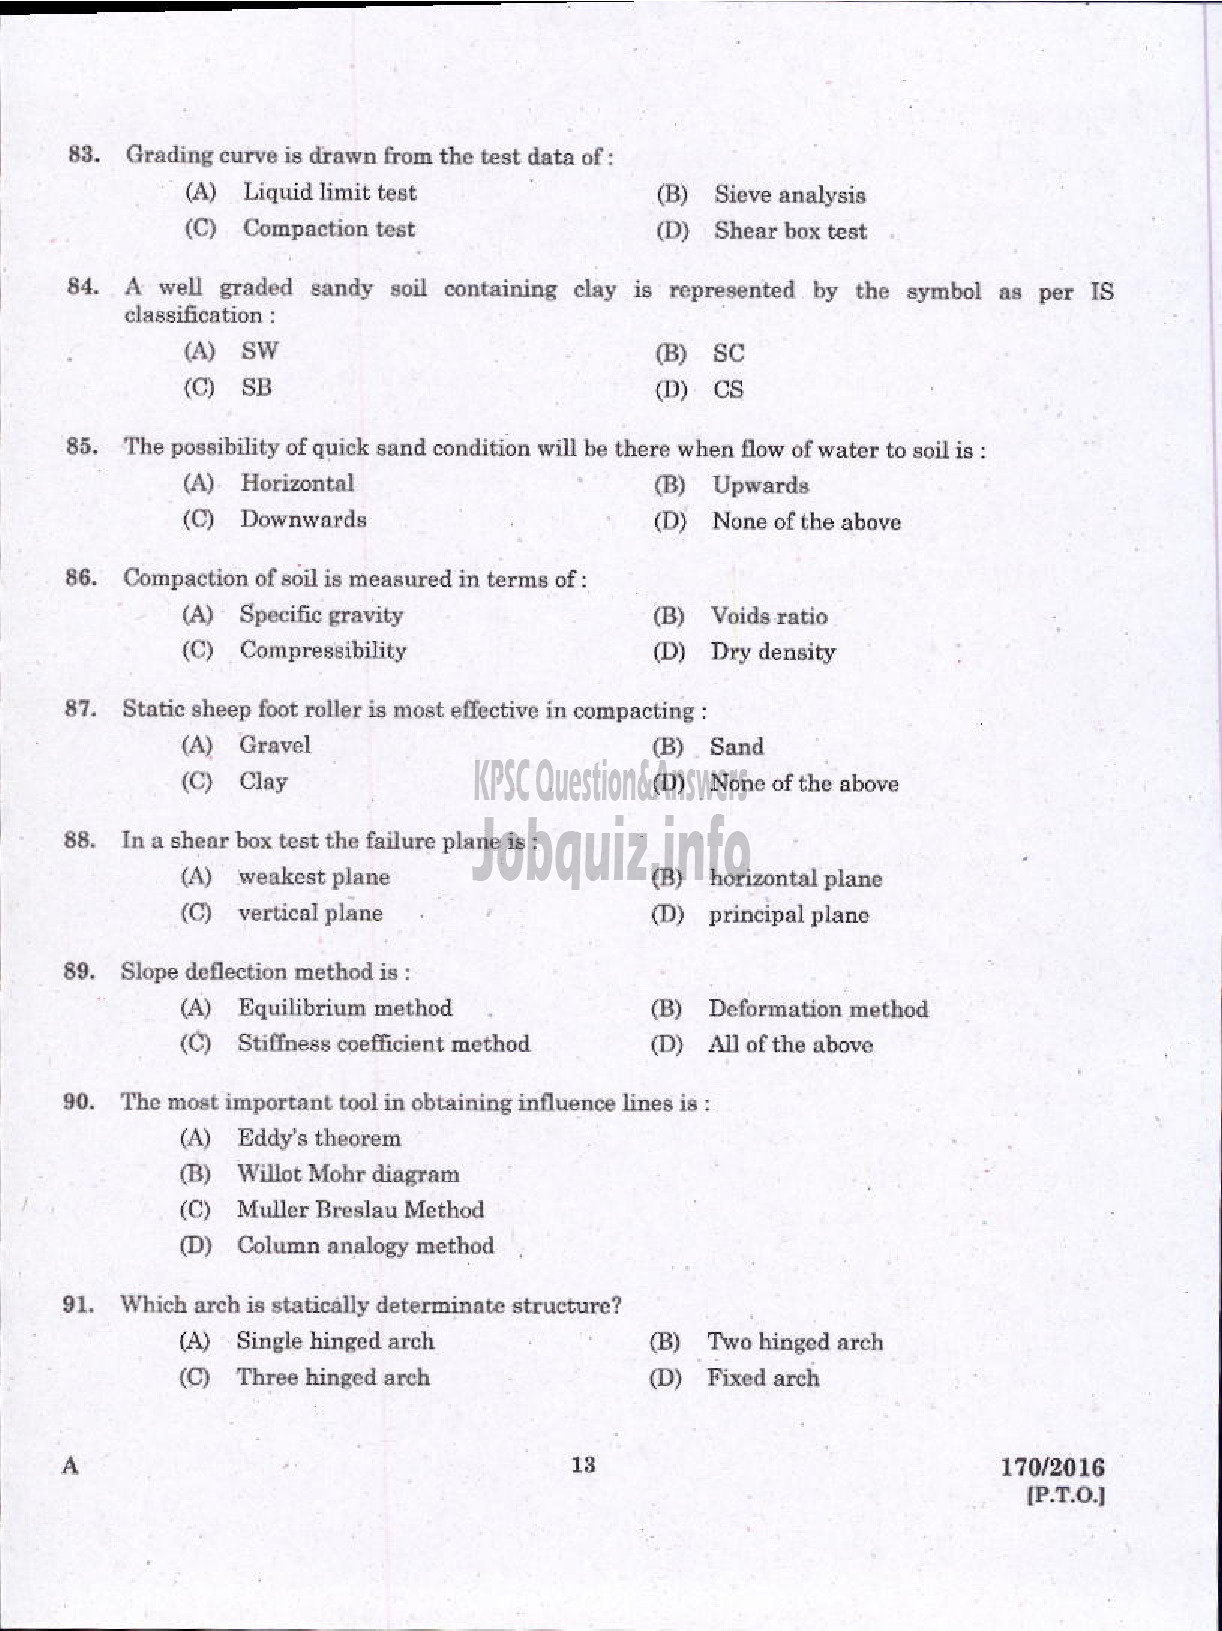 Kerala PSC Question Paper - LECTURER IN CIVIL ENGINEERING GOVT POLYTECHNICS TECHNICAL EDUCATION-11